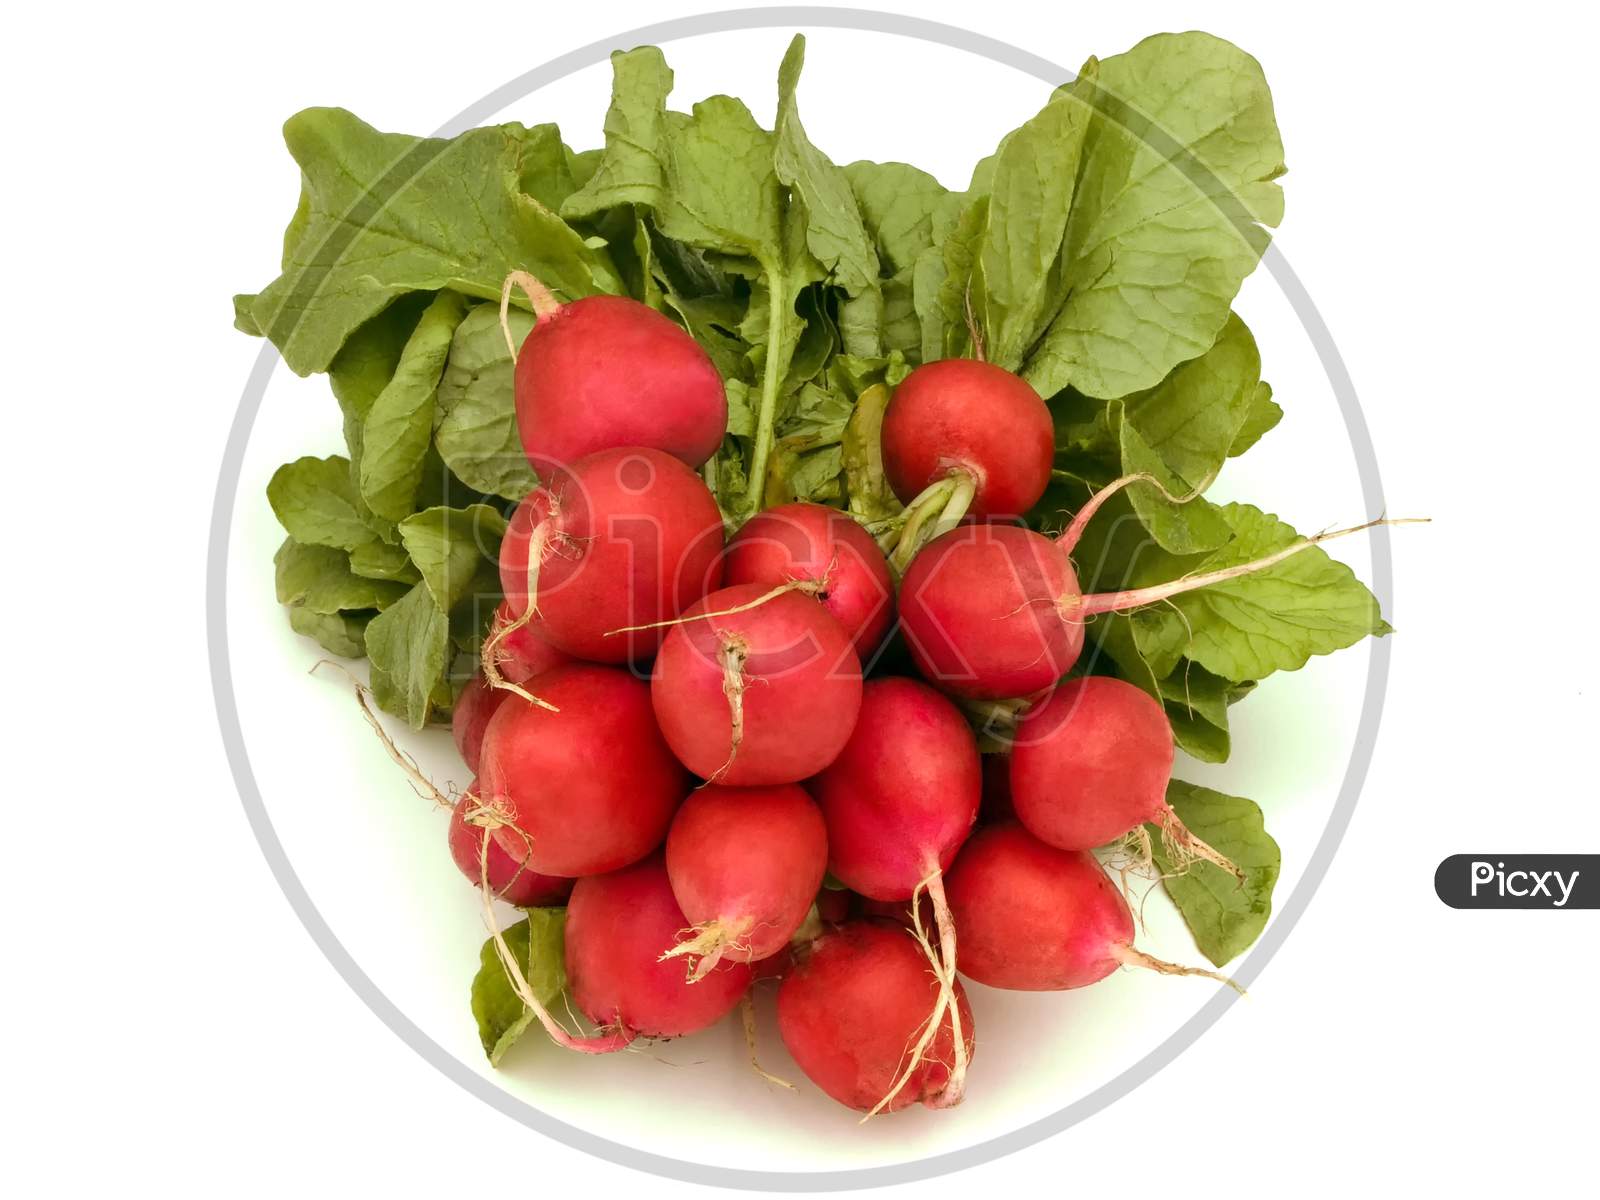 A bunch of freshly picked radishes